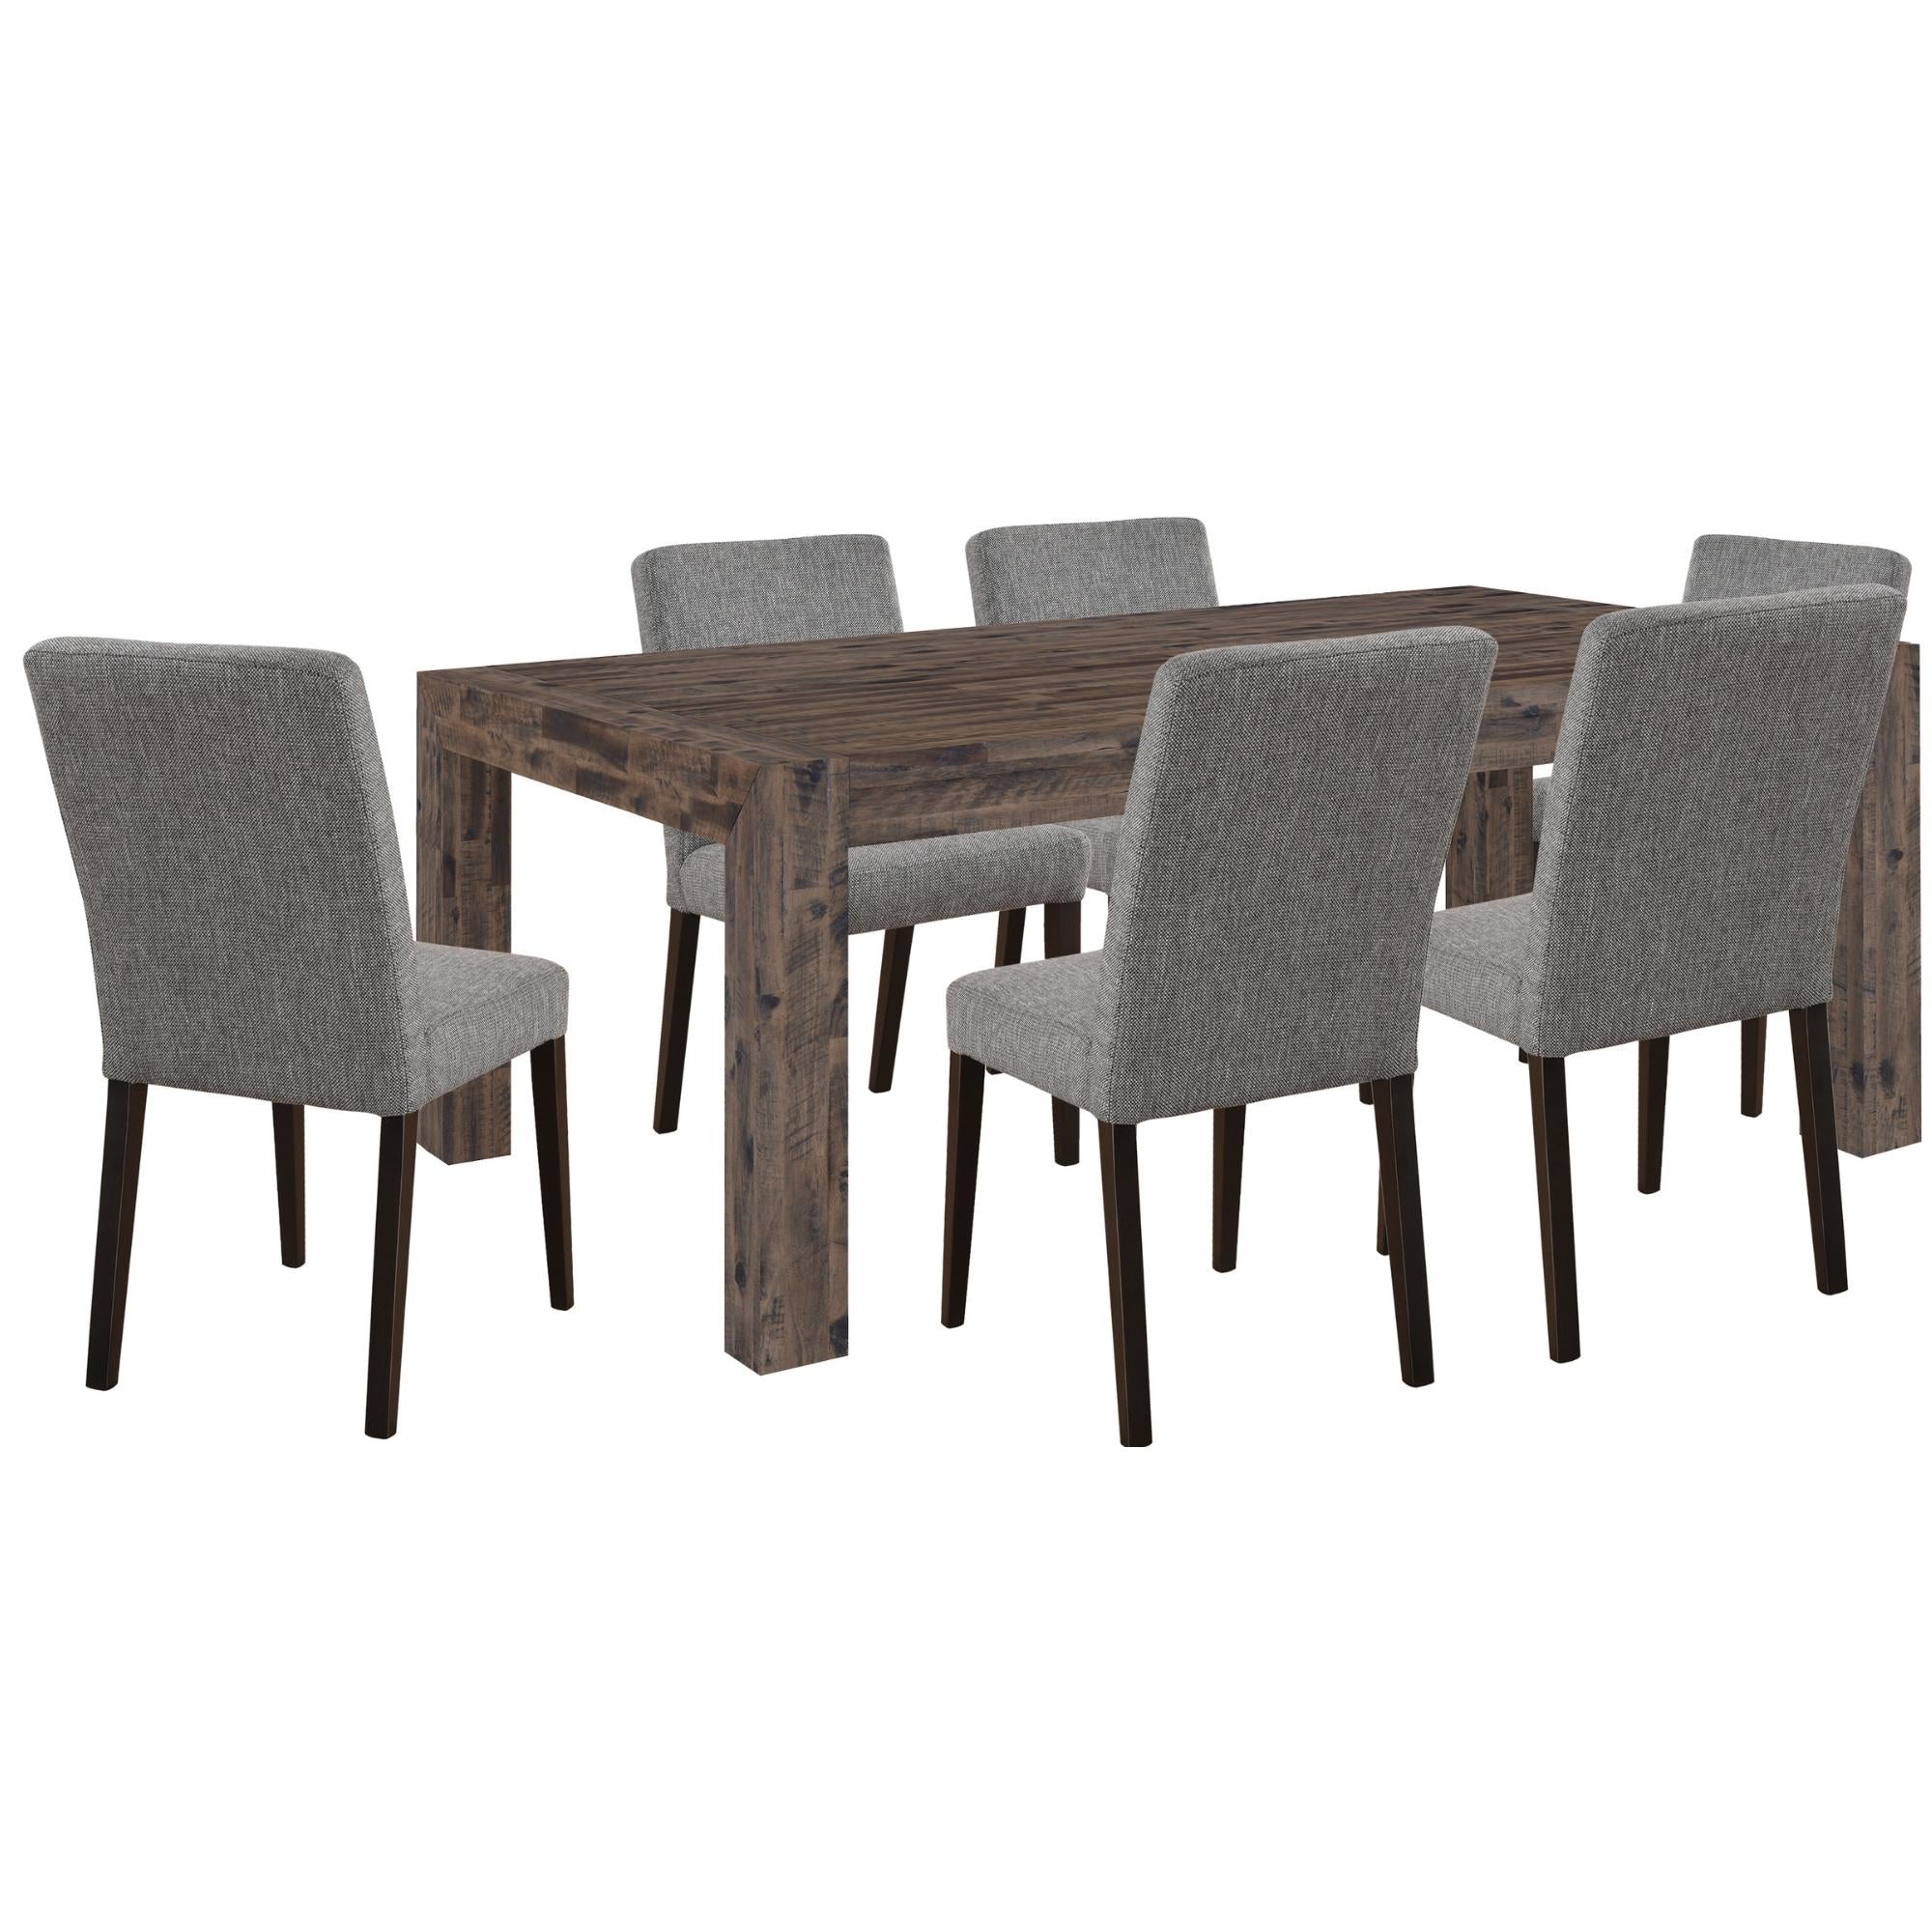 Catmint 7pc Dining Set 180cm Table with 6 Solid Wood Fabric Chair - SILBERSHELL